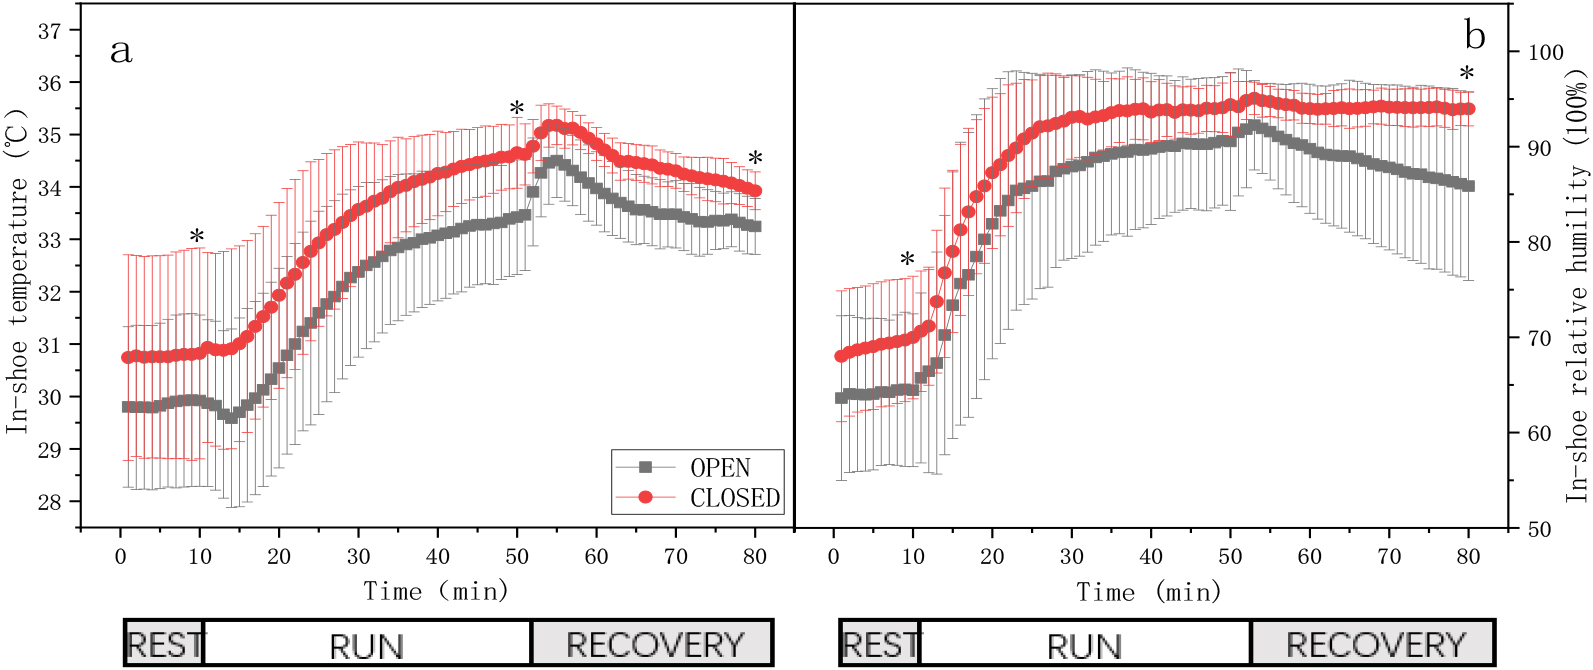 In-shoe temperature and relative humidity with two test shoes during the rest, running, and recovery stages * means a significant difference (p⩽ 0.05).